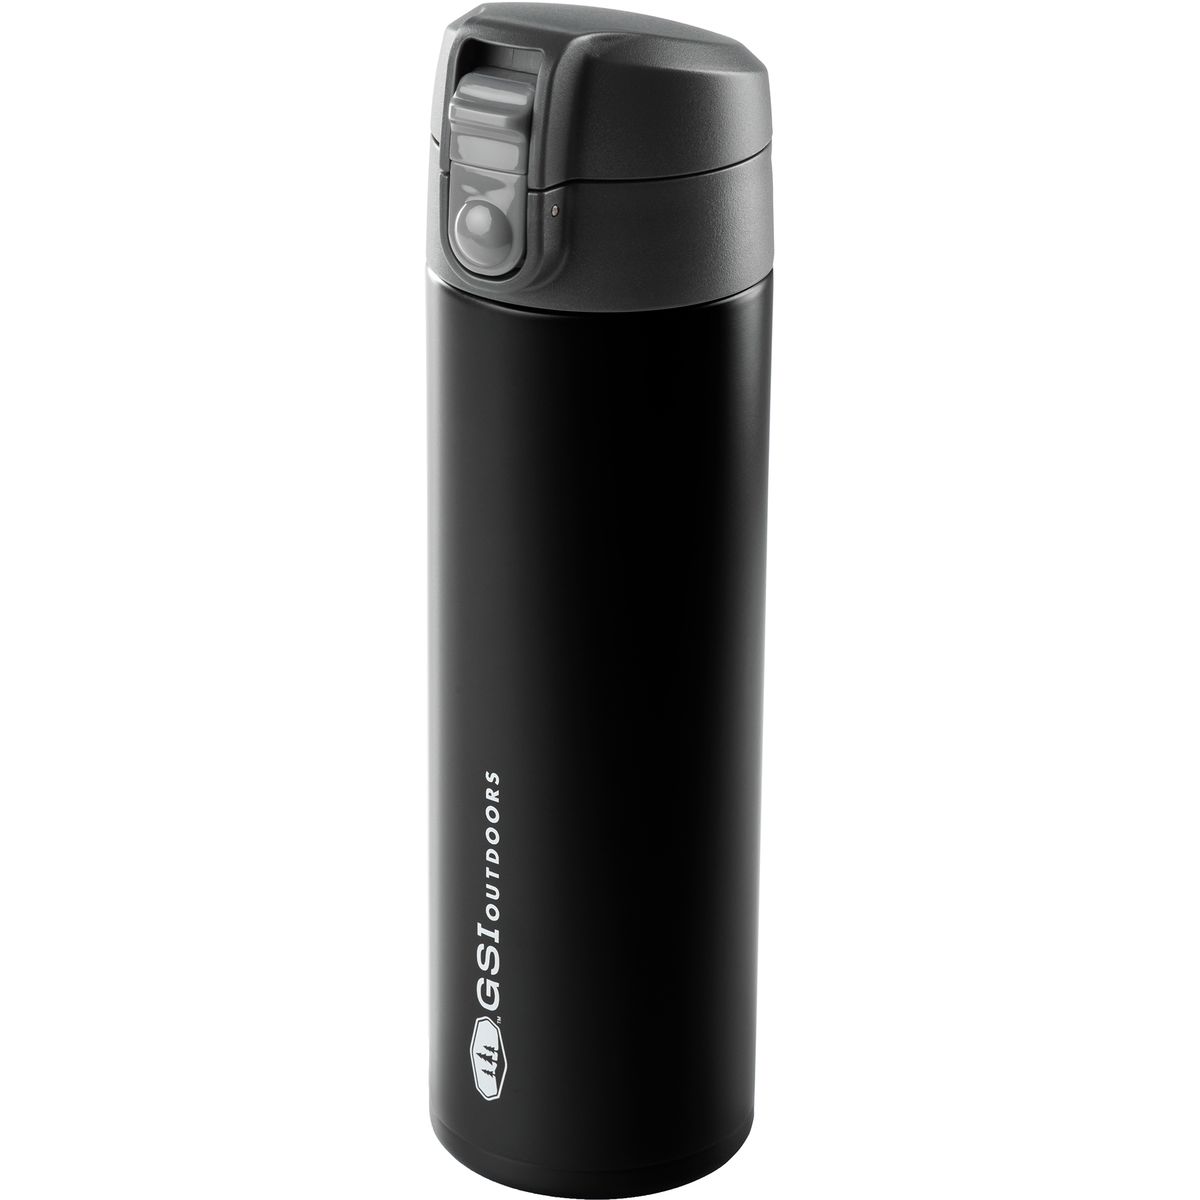 GSI Outdoors Glacier Stainless Microlite 500 Water Bottle